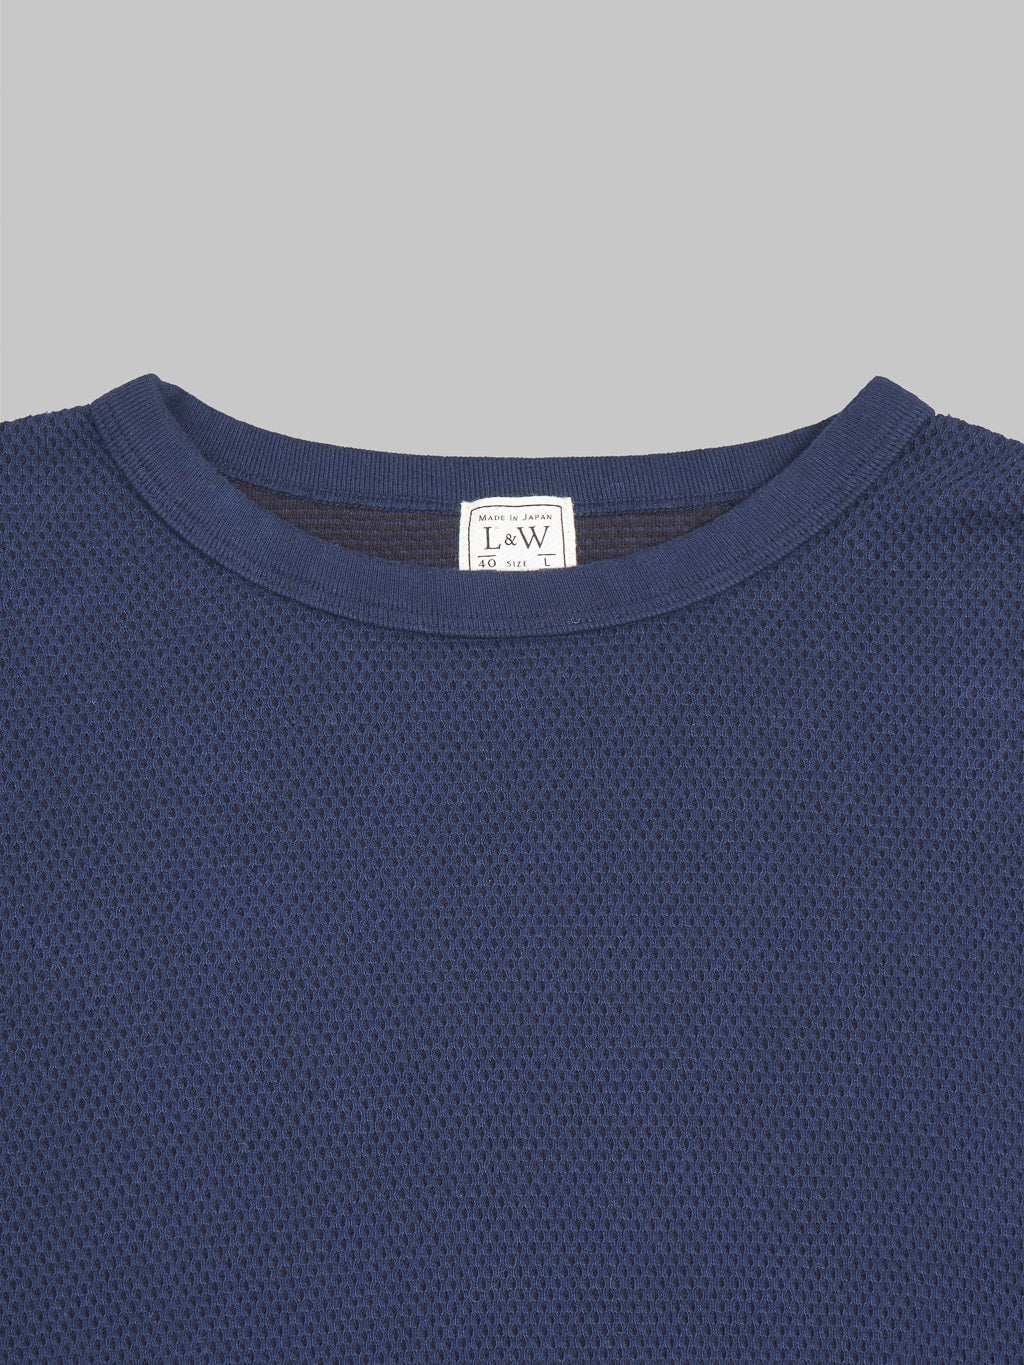 Loop & Weft Double Face Hex Honeycomb Crewneck Thermal Royal Navy